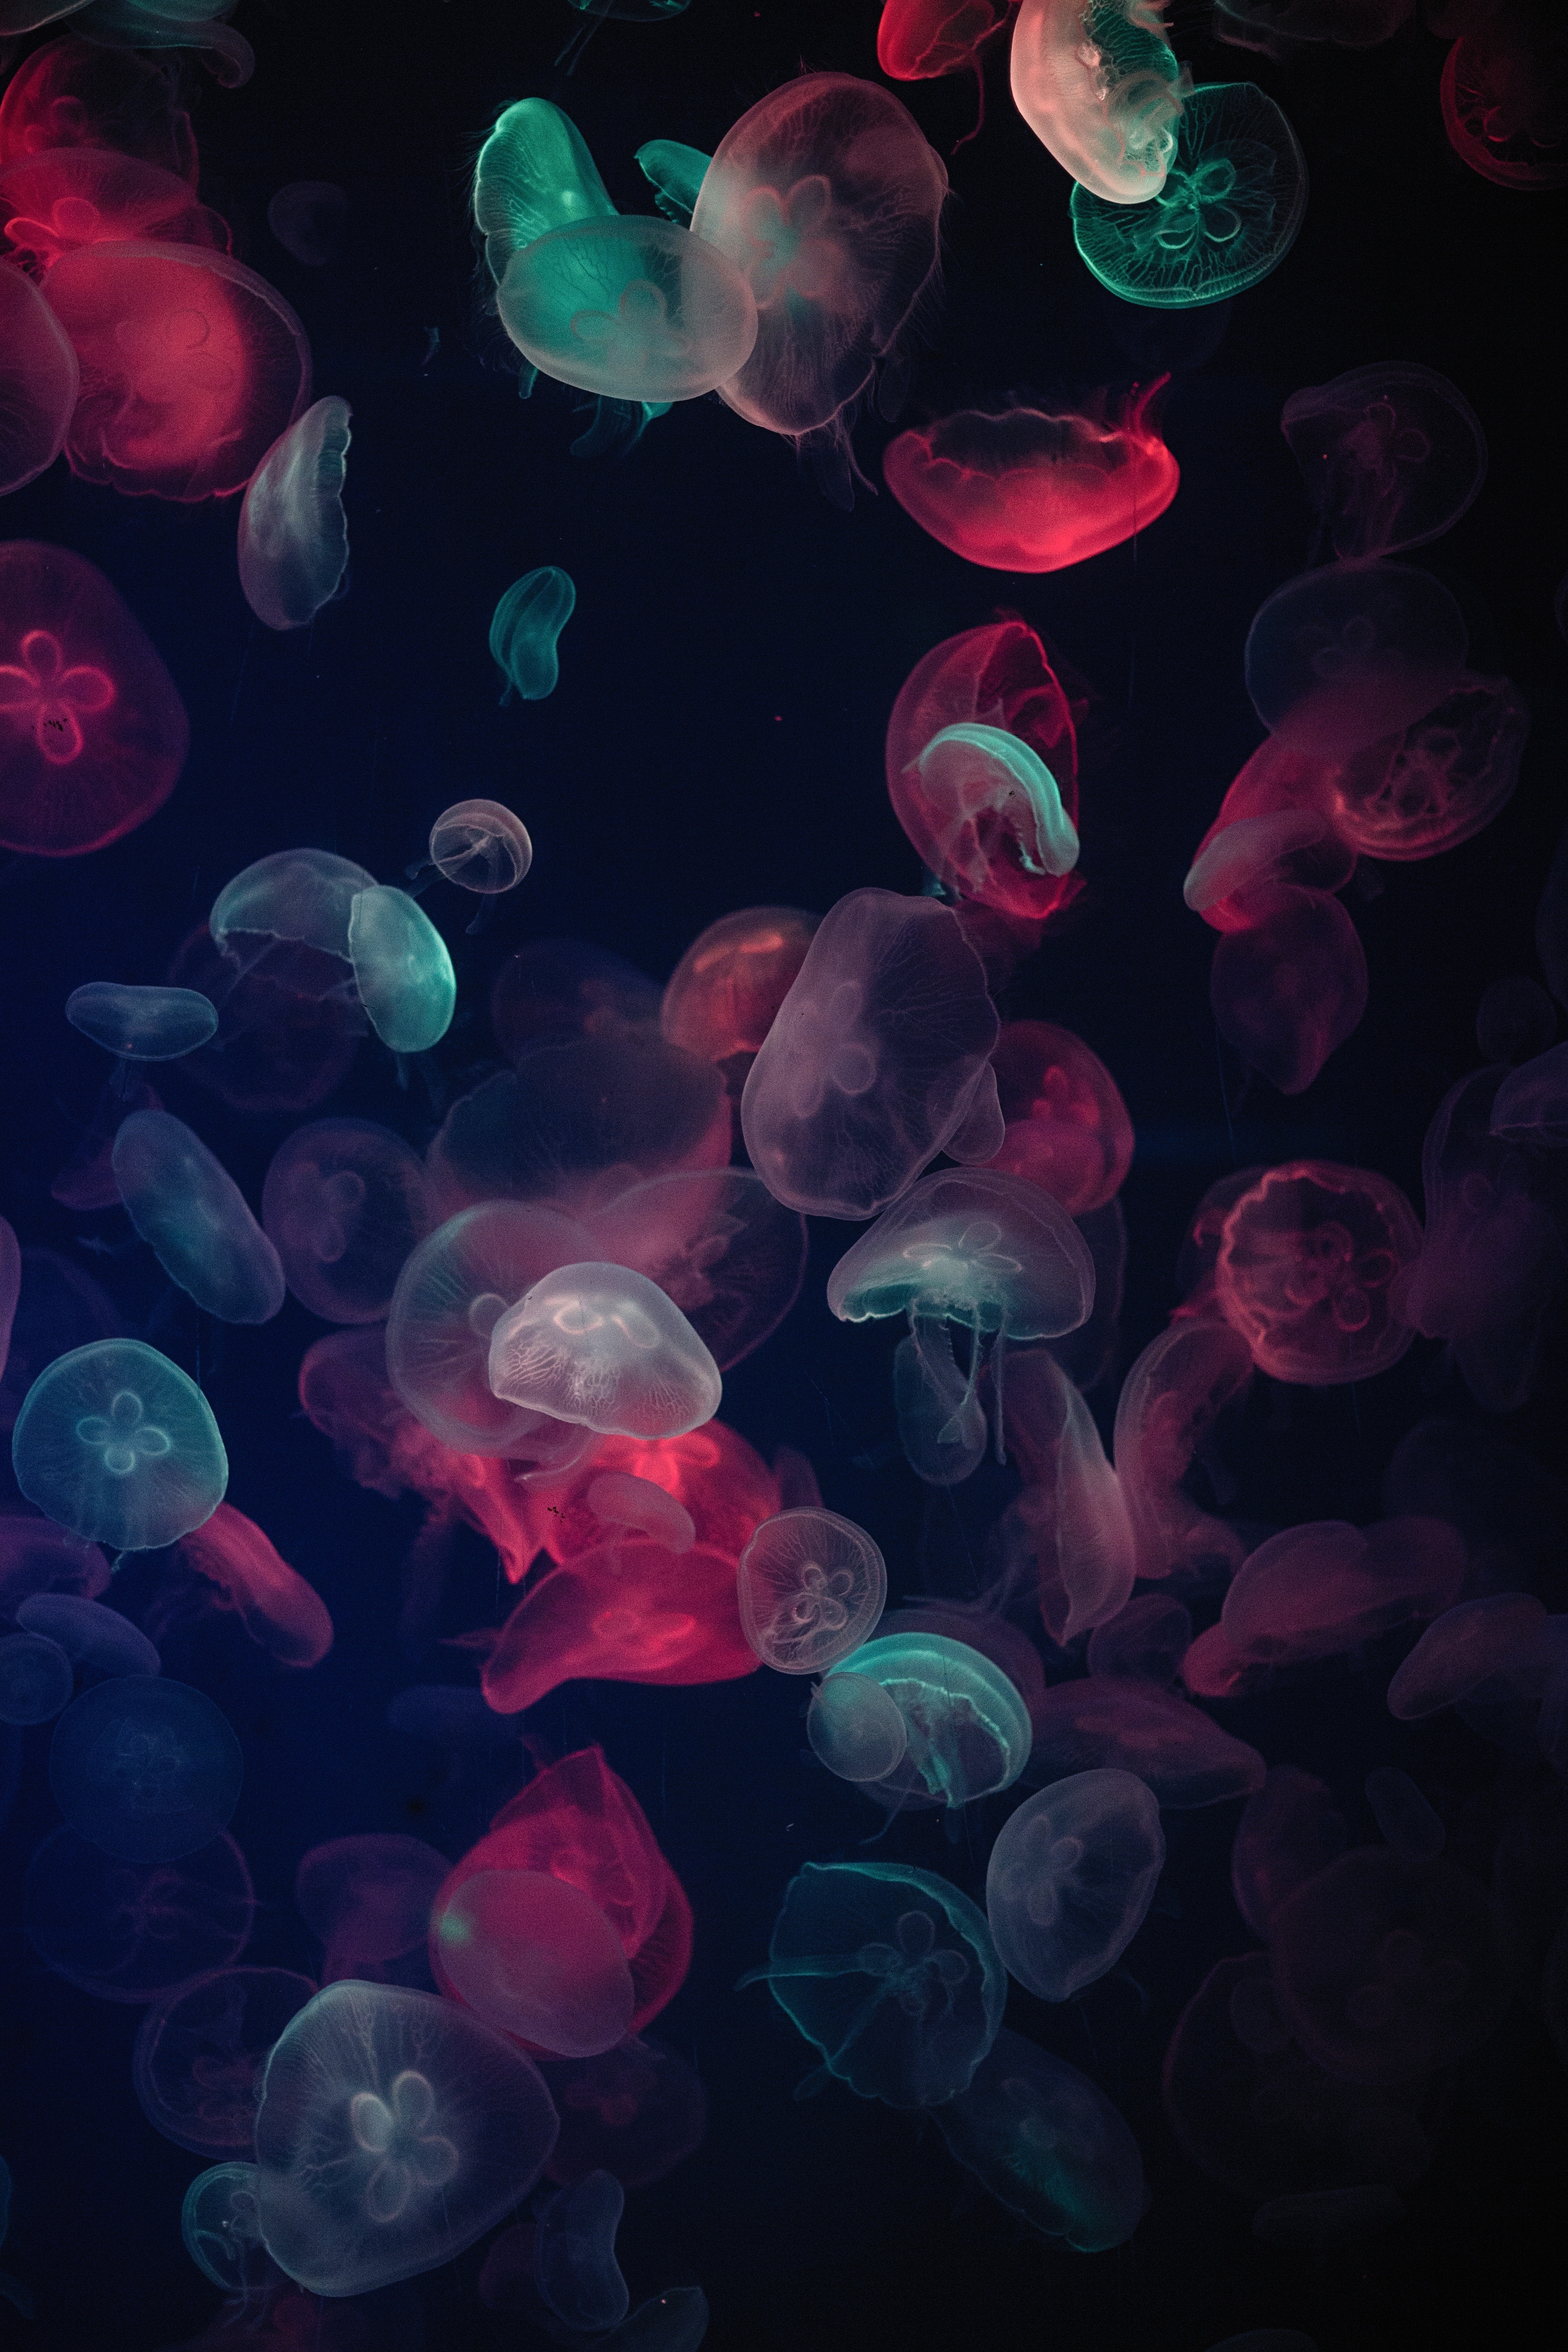 97222 download wallpaper animals, jellyfish, multicolored, motley, glow, underwater world screensavers and pictures for free